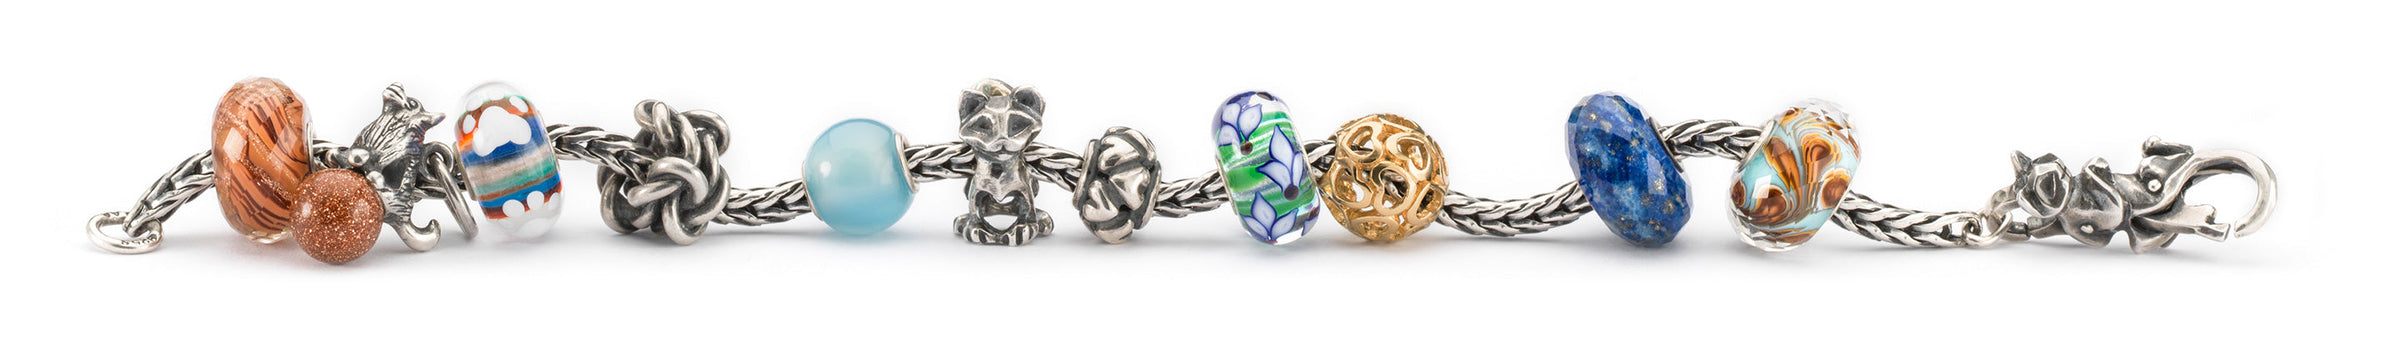 Trollbeads bracelet a mix og beads in gold, silver and gemstones, one glass bead with a small paw print charm, and beads with cats and a dog representing the cherished bond and affection between pets and their owners.